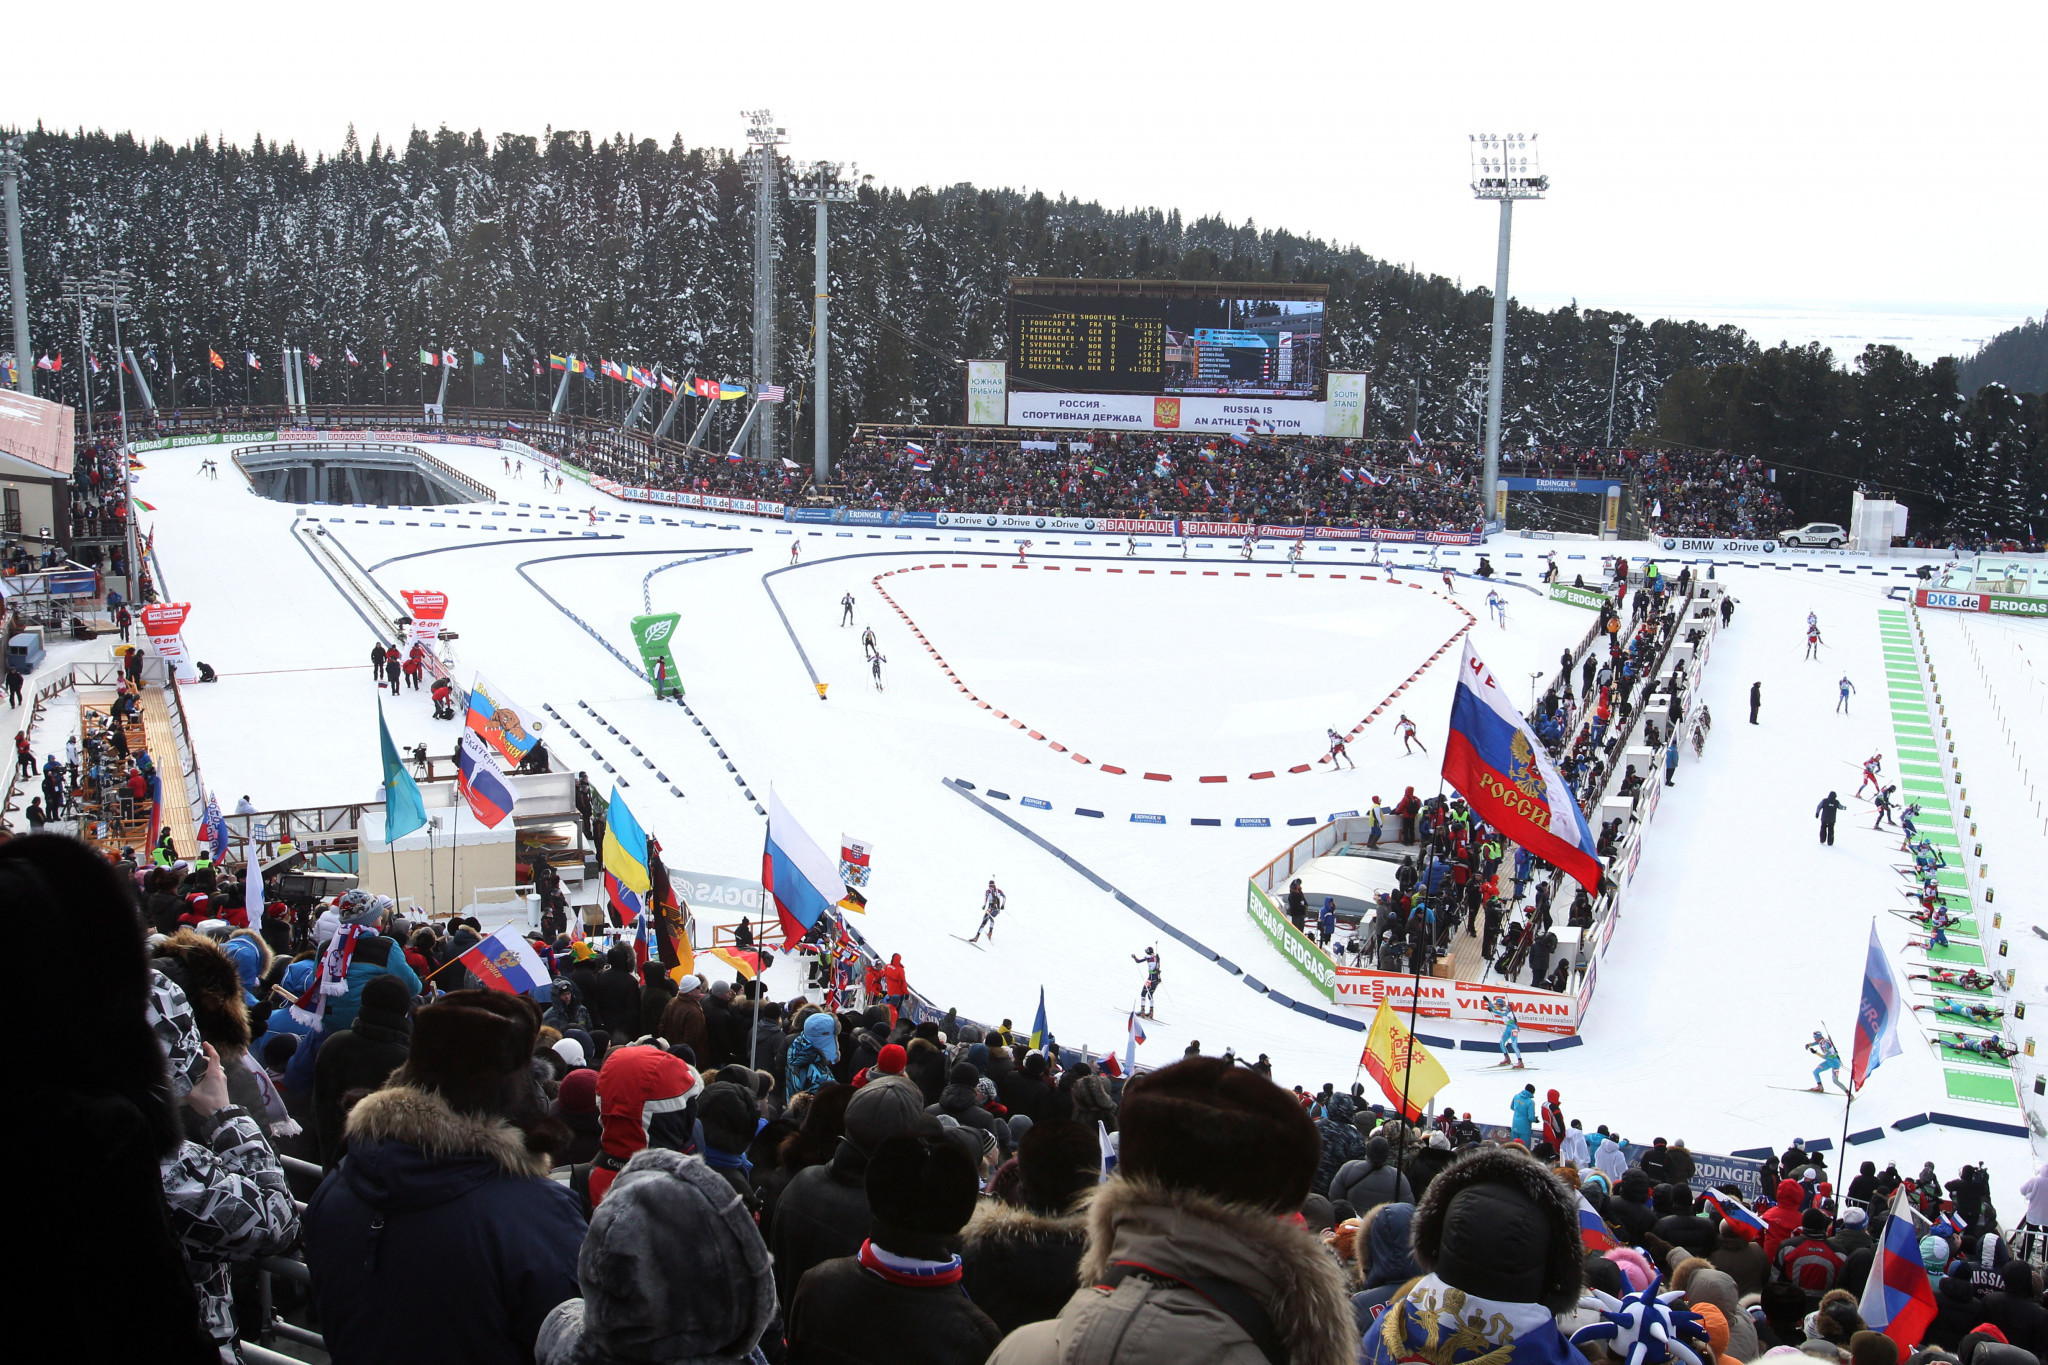 Khanty-Mansiysk has featured multiple winter sport events including the IBU World Cup ©Getty Images